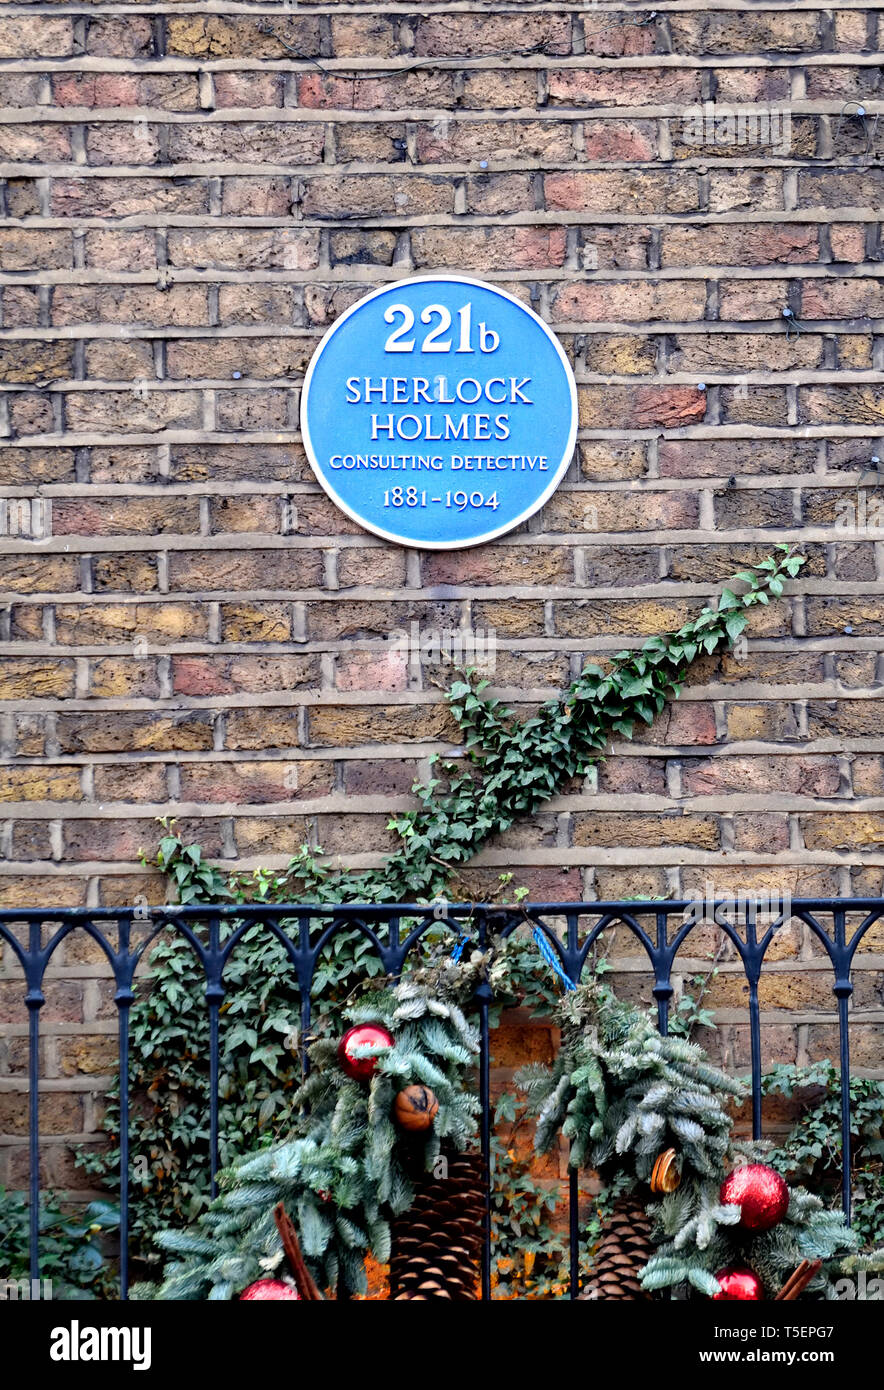 London, England, UK. Commemorative Blue Plaque: 221b Sherlock Holmes consulting detective 1881-1904 (fictional character) 221b Baker Street (with Chri Stock Photo